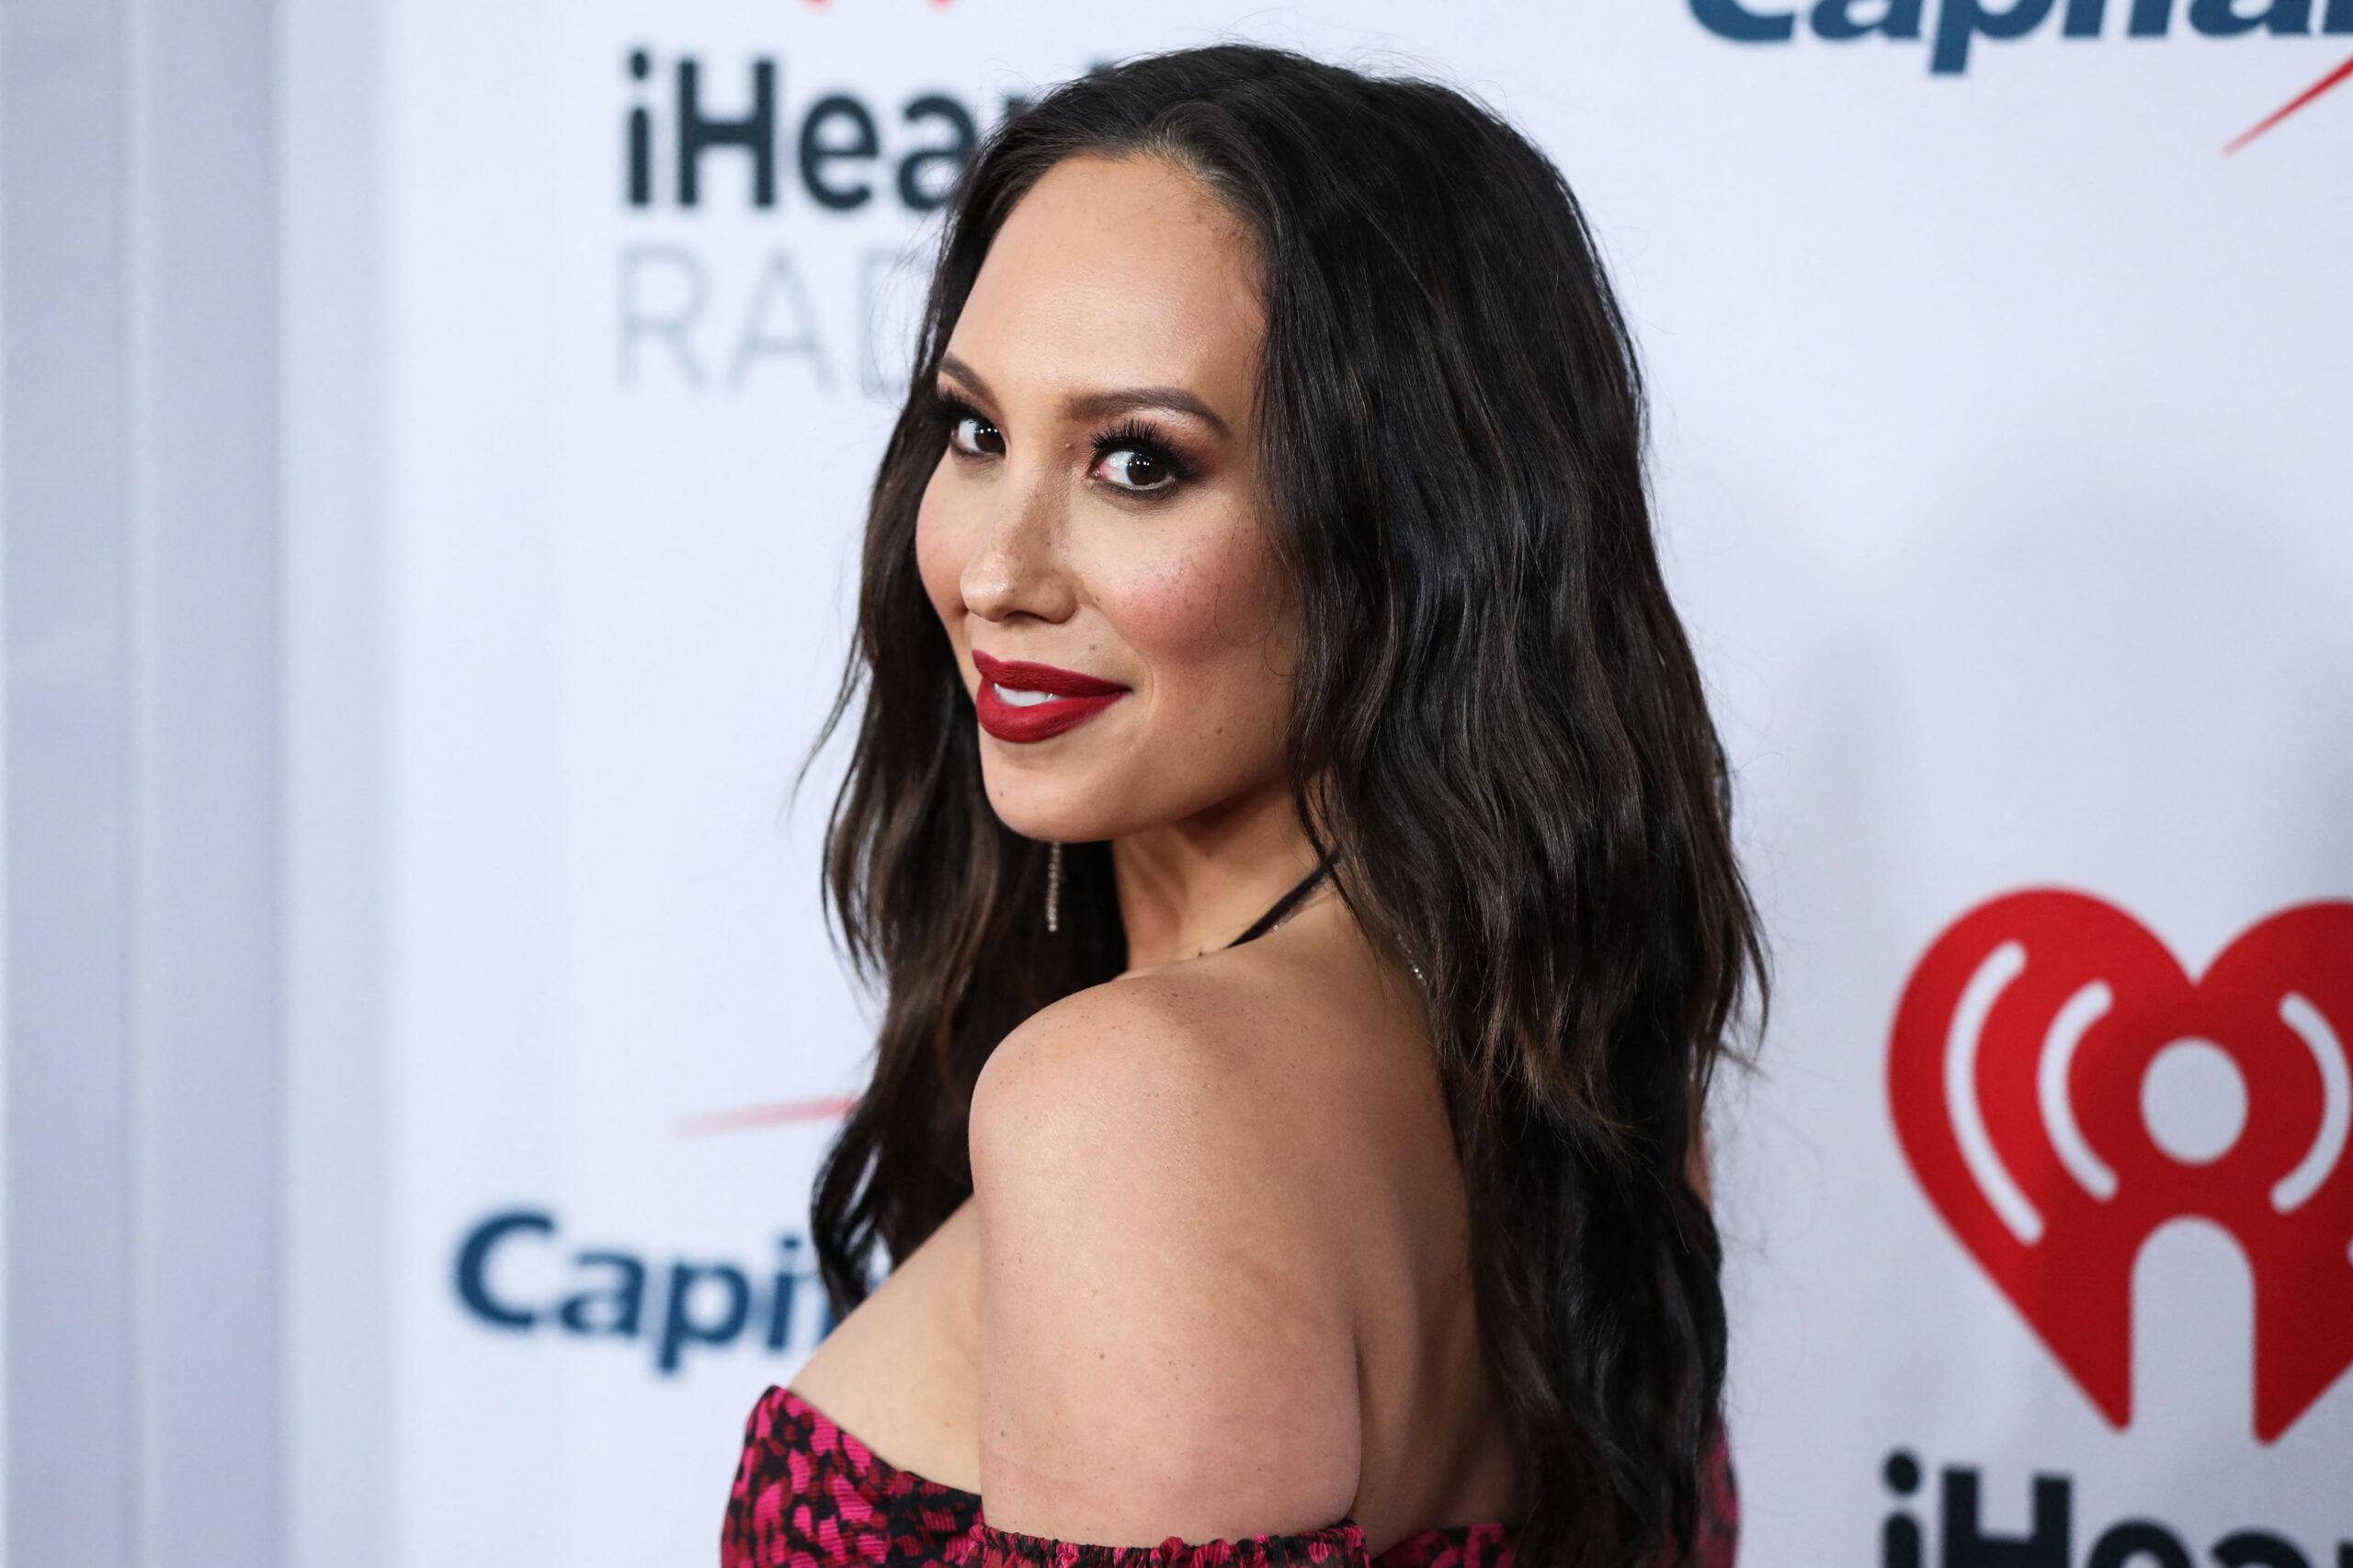 Cheryl Burke Gets Candid About 'Dancing With The Stars' Days: 'Too Fat For TV'